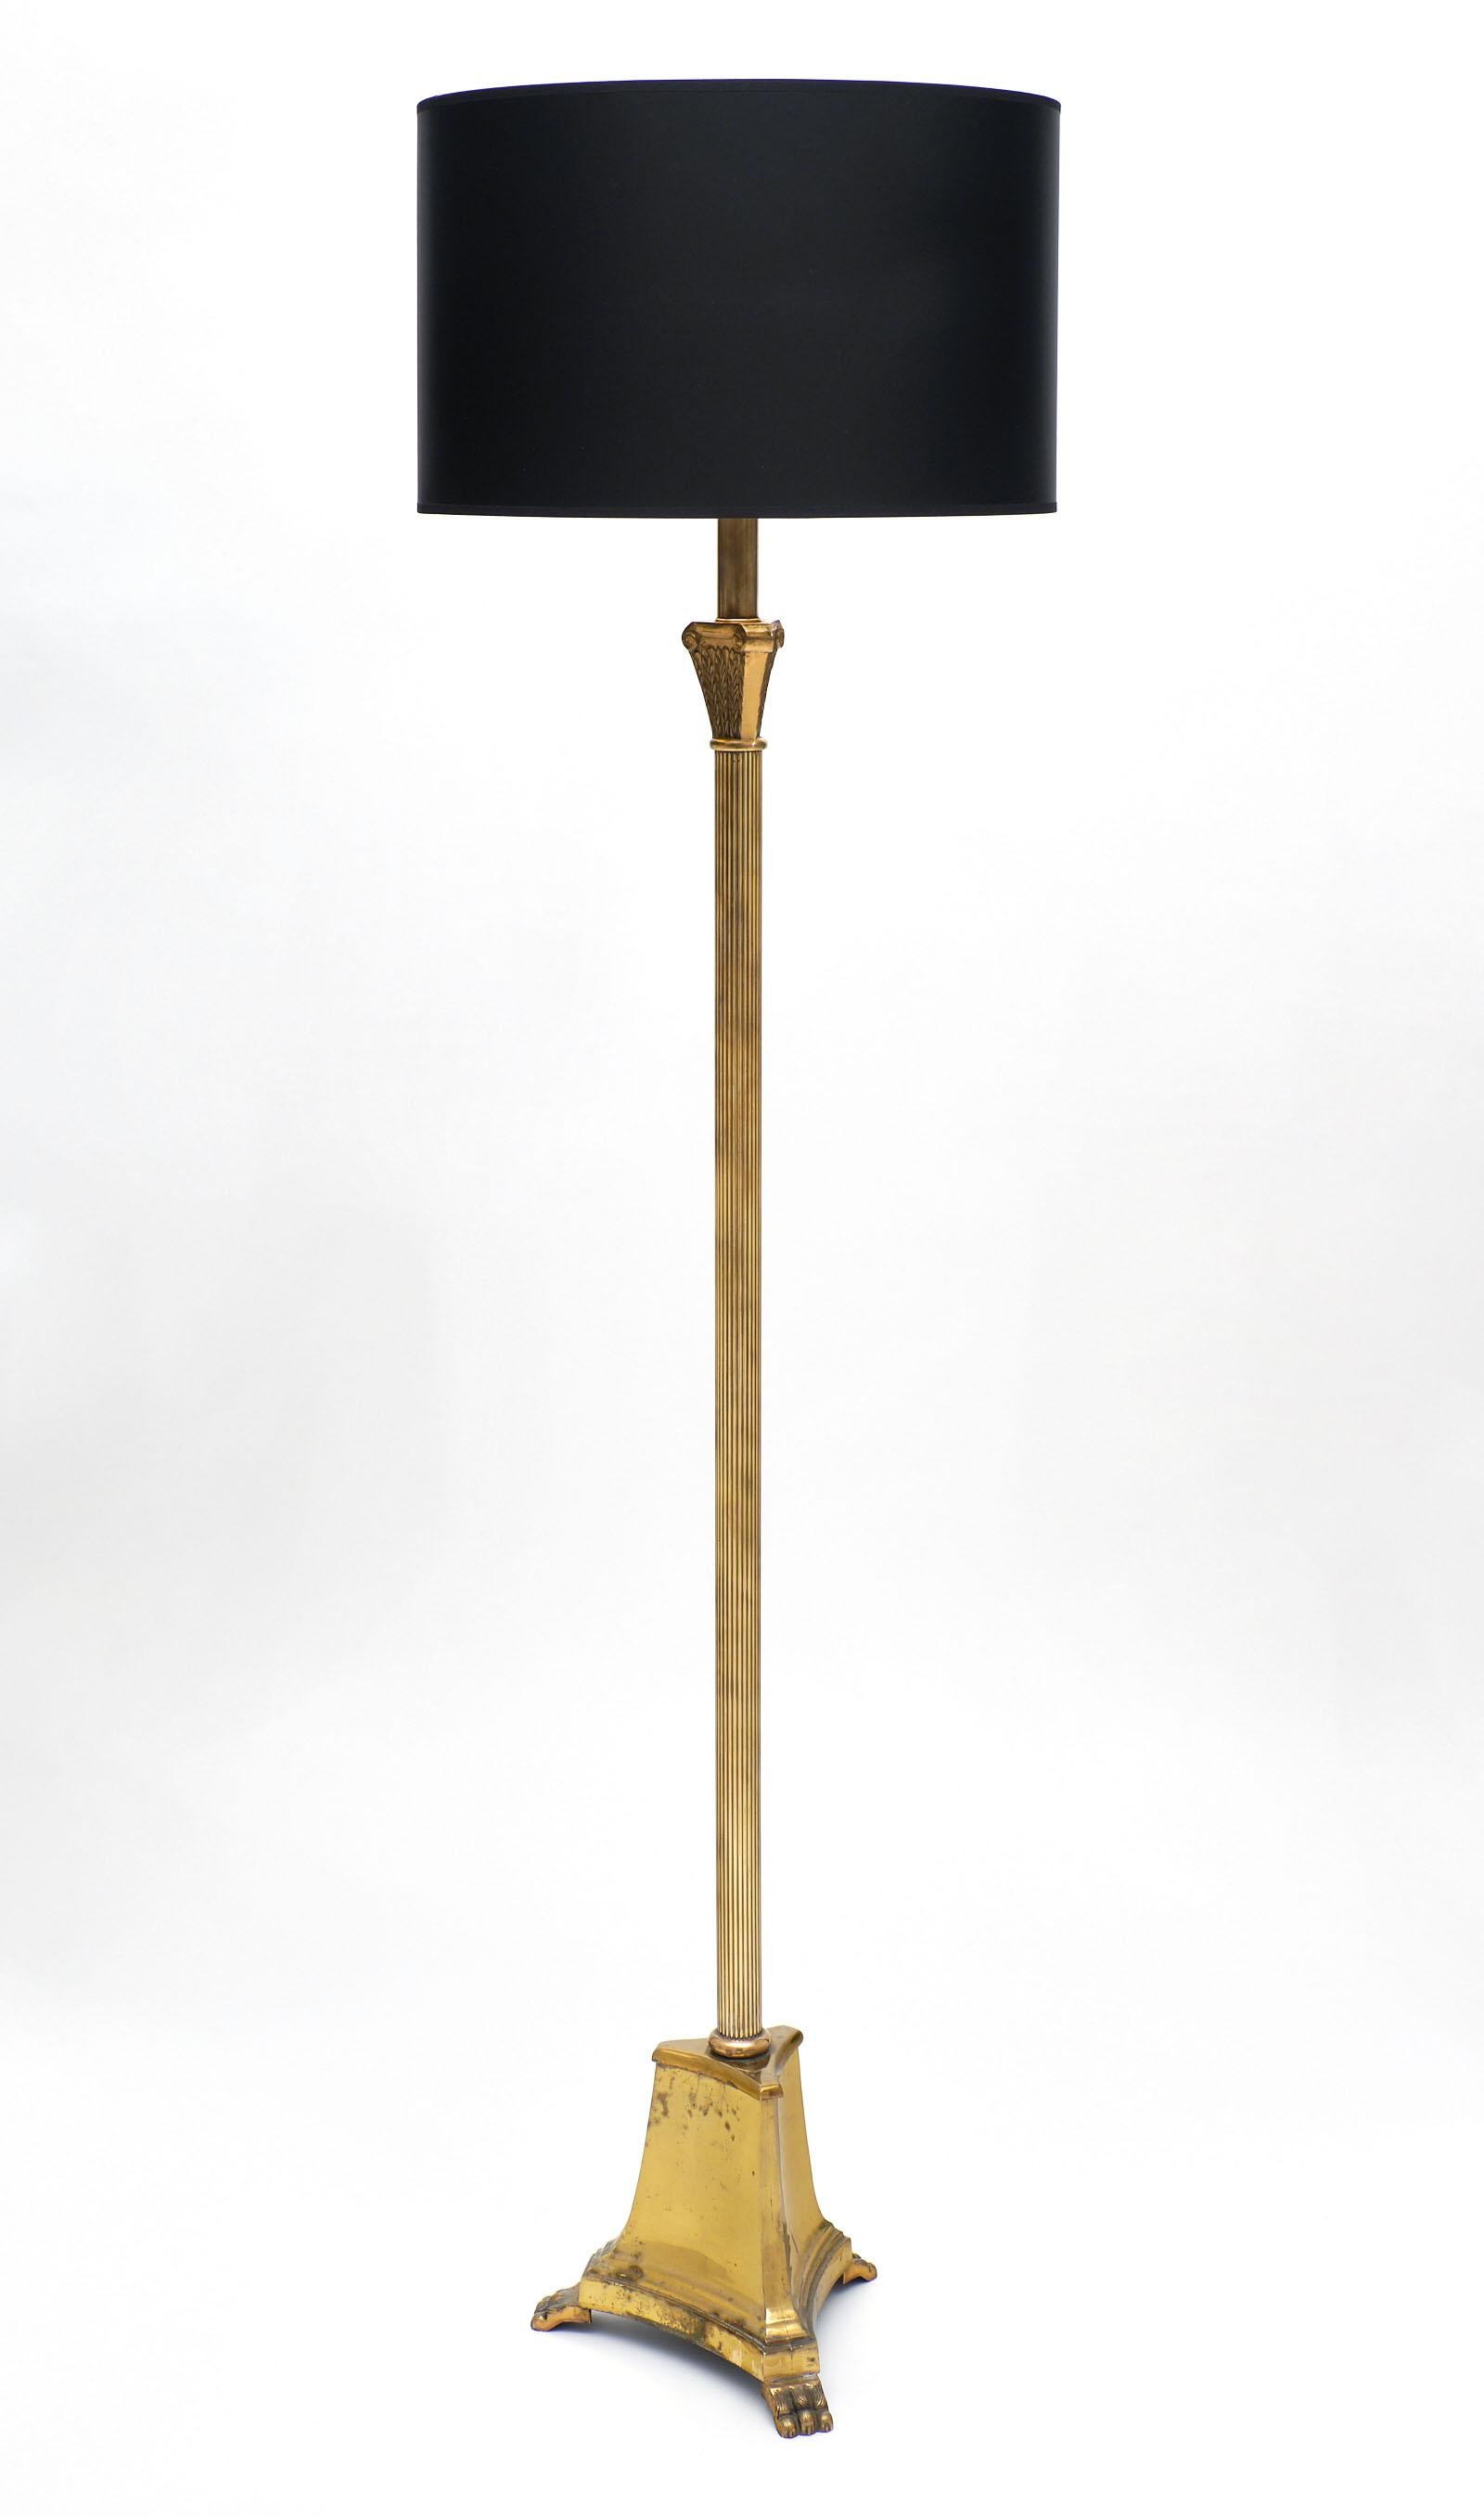 French Art Deco period floor lamp made of gilded brass and featuring a stylized tripod base with claw feet. We love the stylized Corinthian capital. It has been newly wired to fit US standards.